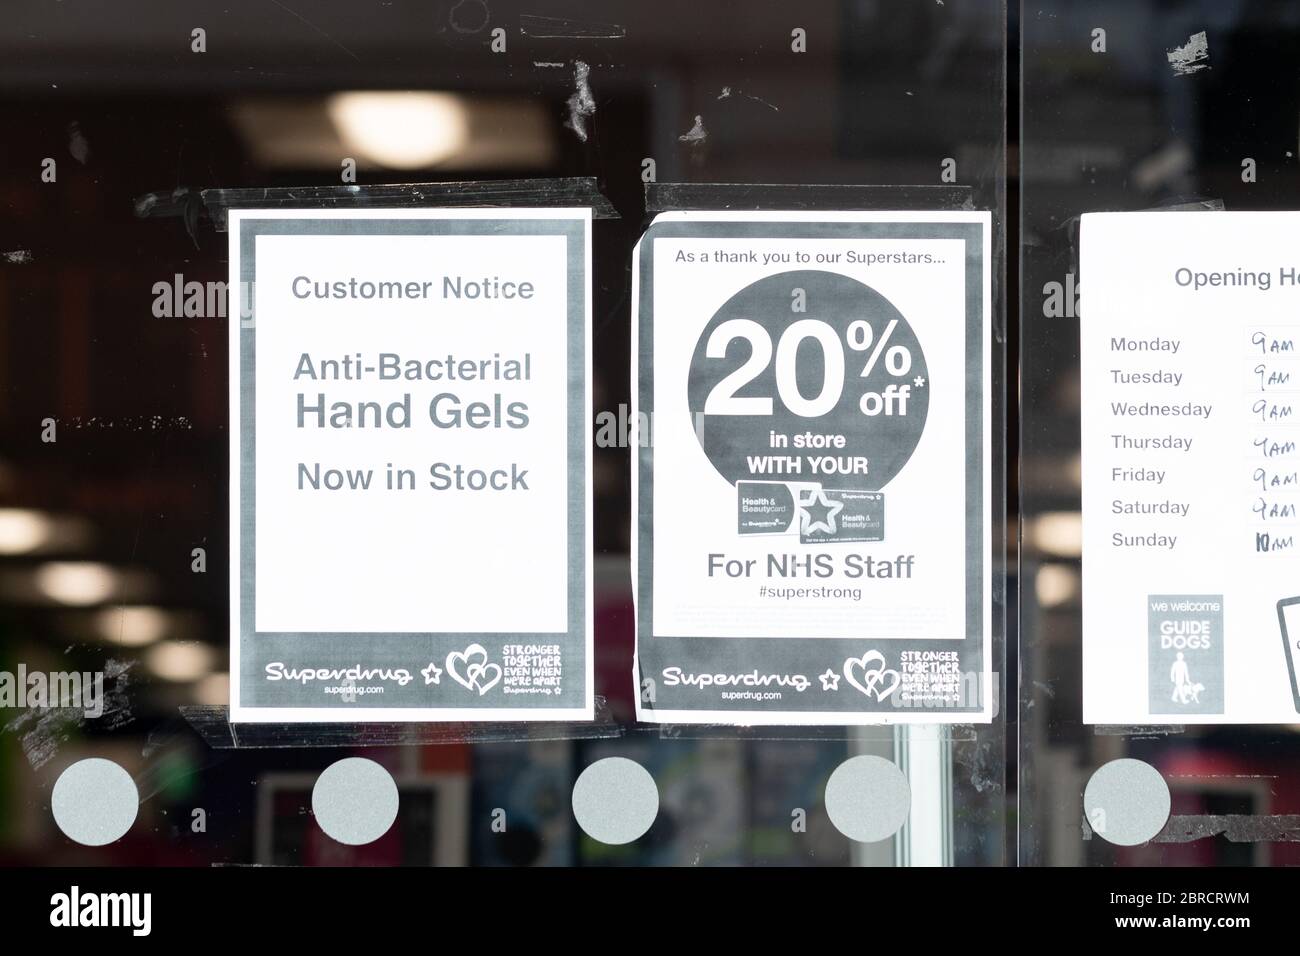 Superdrug store during coronavirus pandemic with signs advertising anti-bacterial hand gels now in stock and 20% discount for nhs staff - Glasgow Stock Photo